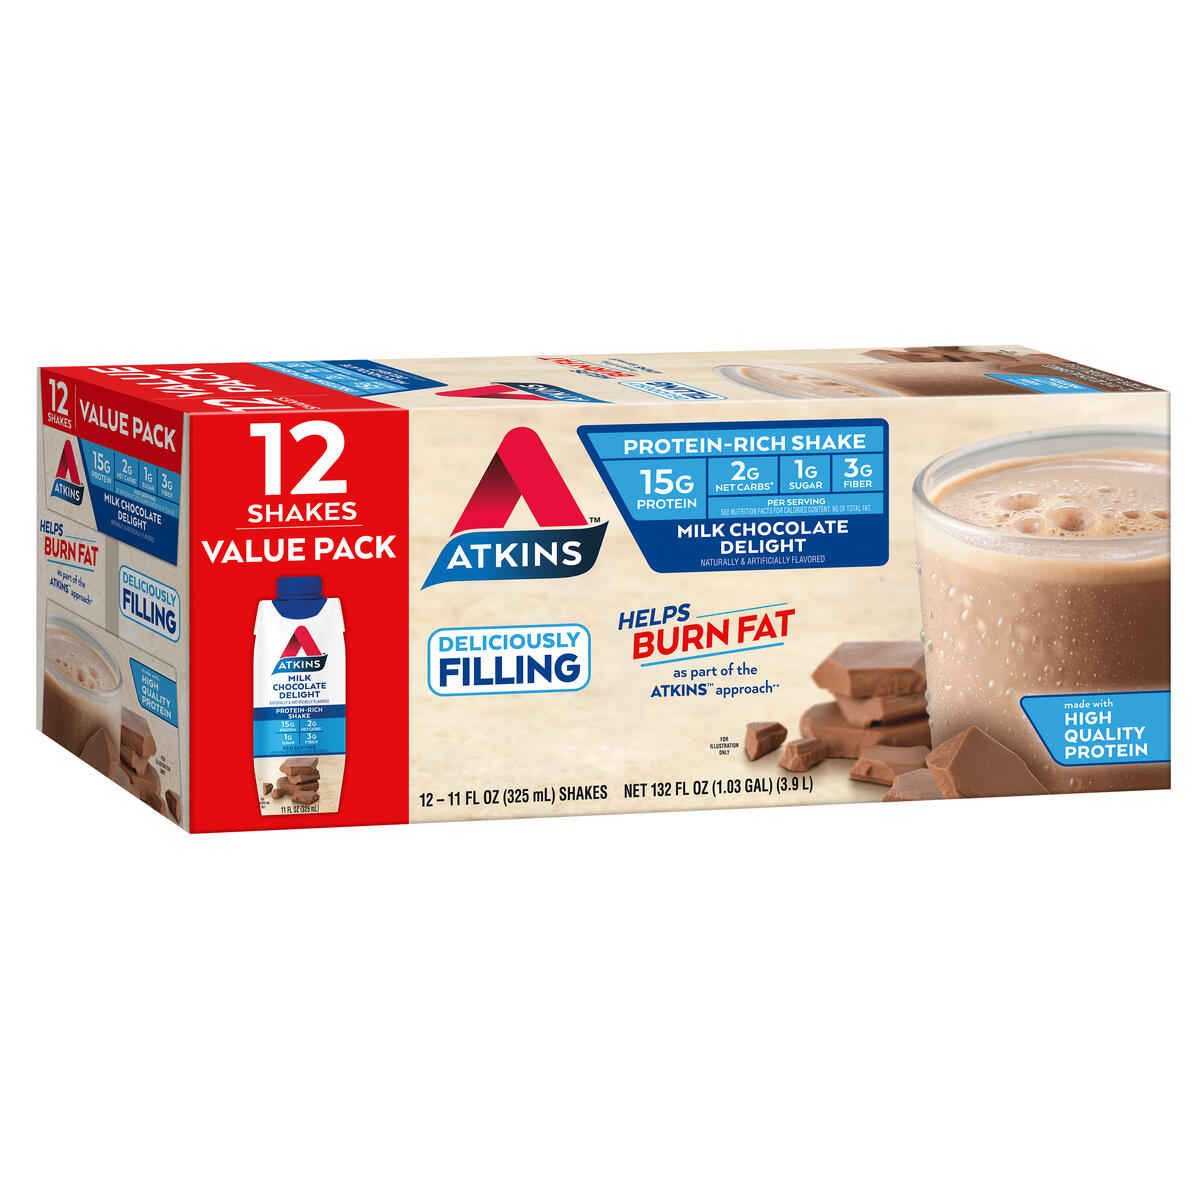 Atkins Milk Chocolate Delight Protein Shake, High Protein, Low Carb, Low Sugar, Keto Friendly, Gluten Free, 12 Ct - image 2 of 8